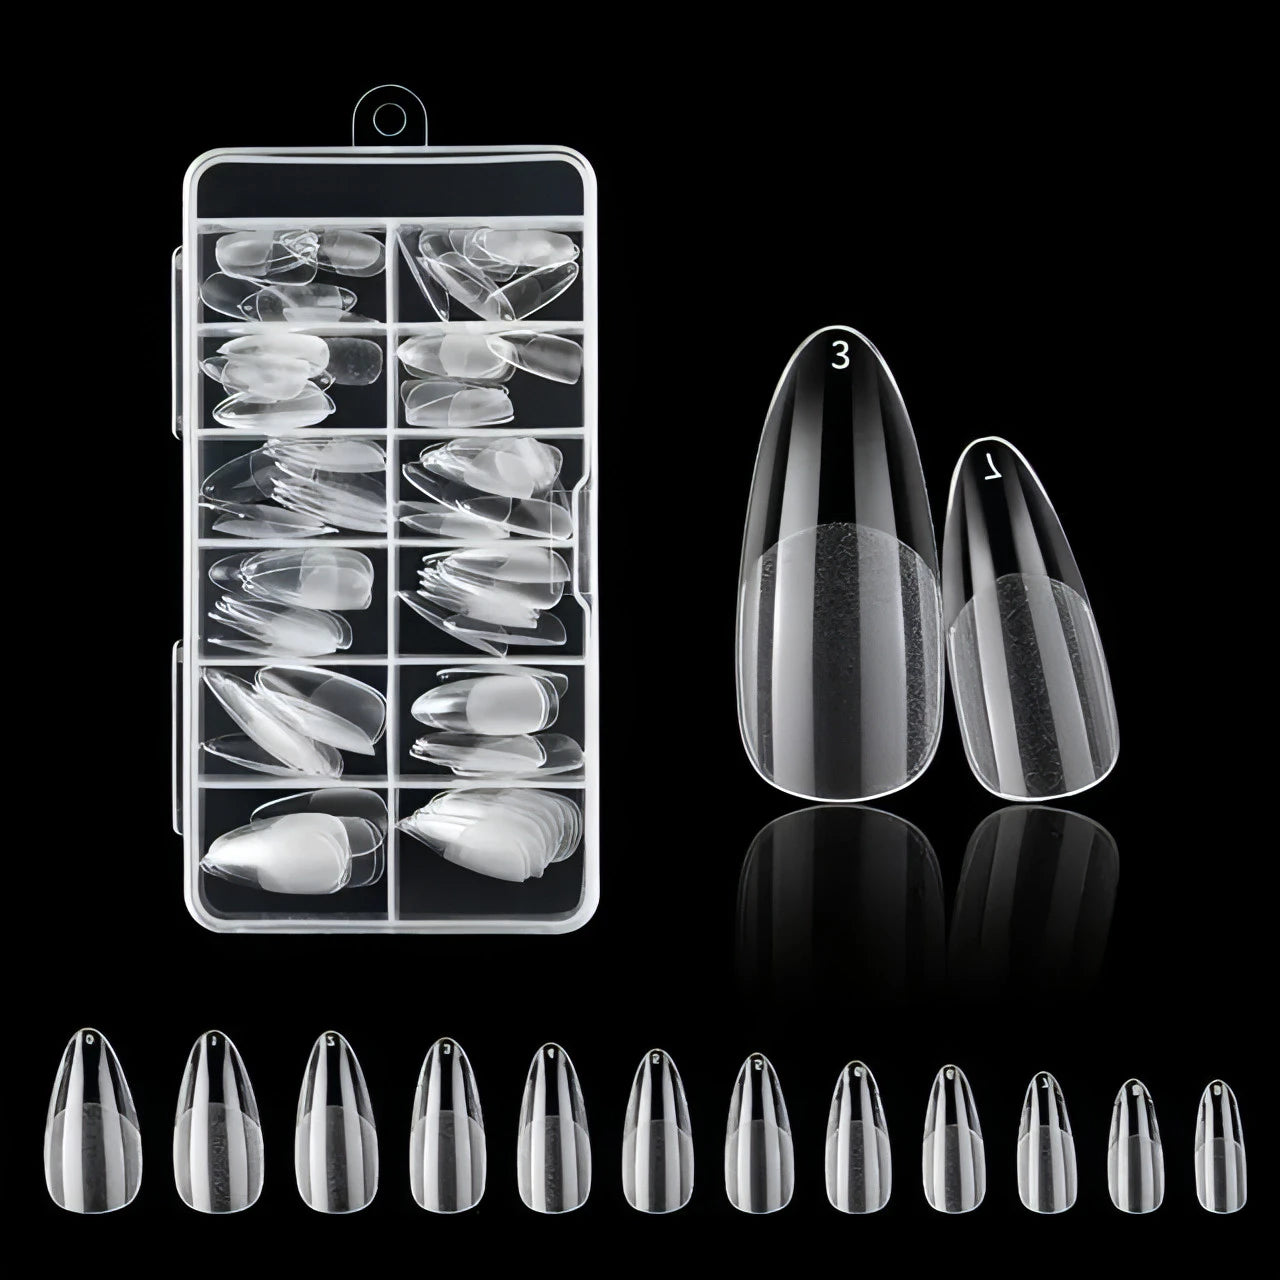 120Pcs Fake Nails American Capsule Gel X Coffin - Allure SocietyFalse Nail Kits and Dryers